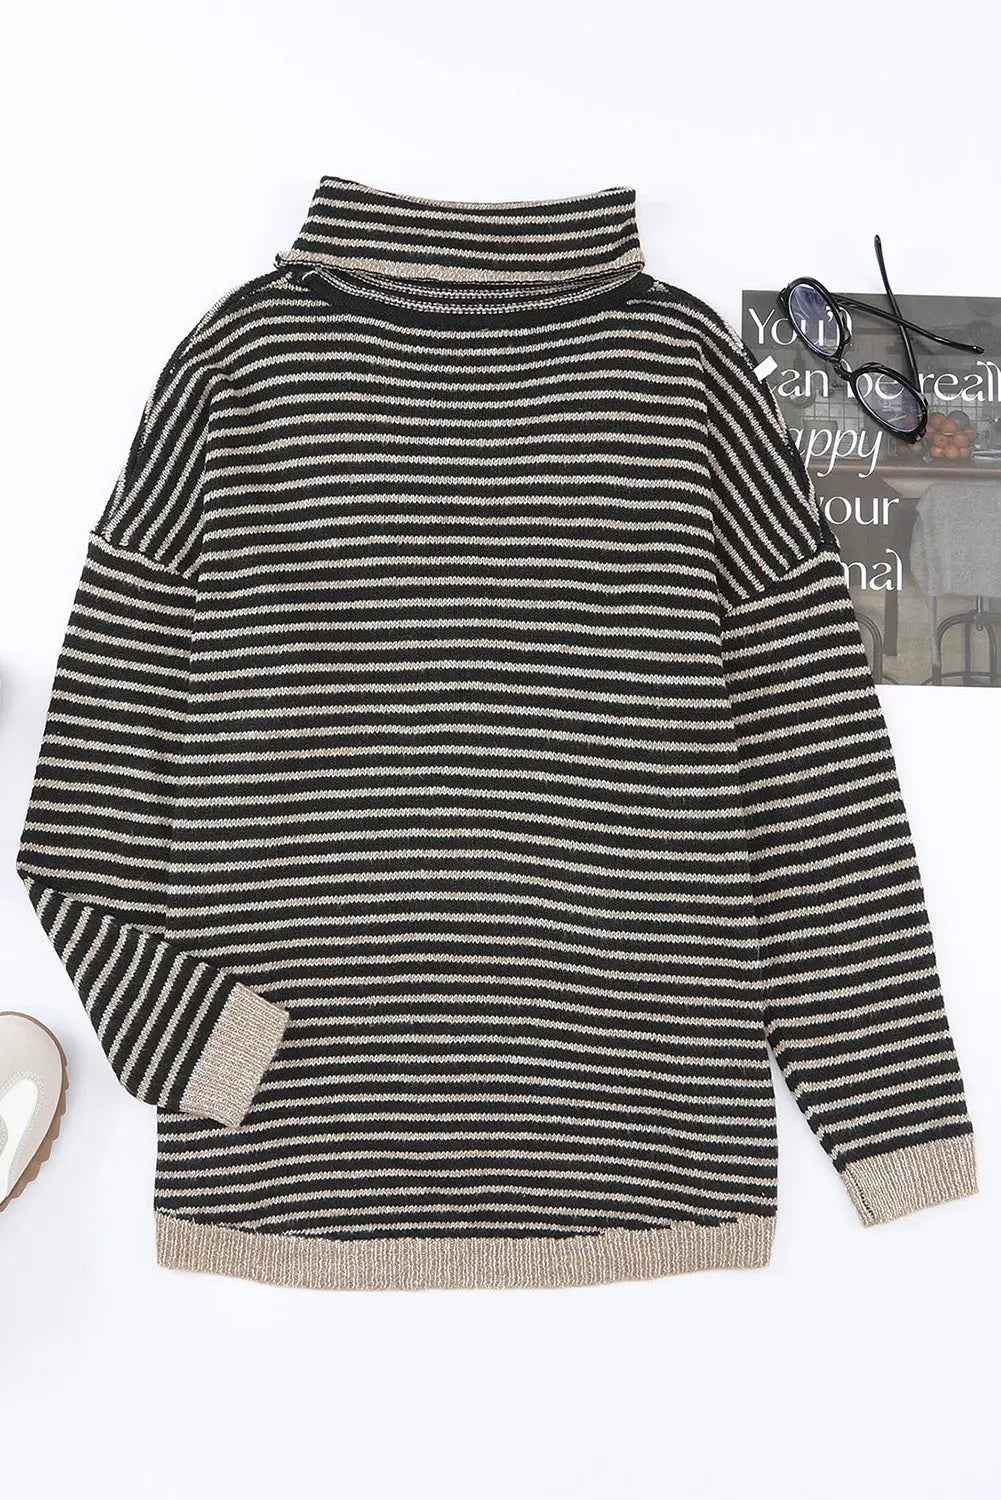 Brown striped turtleneck loose sweater - tops